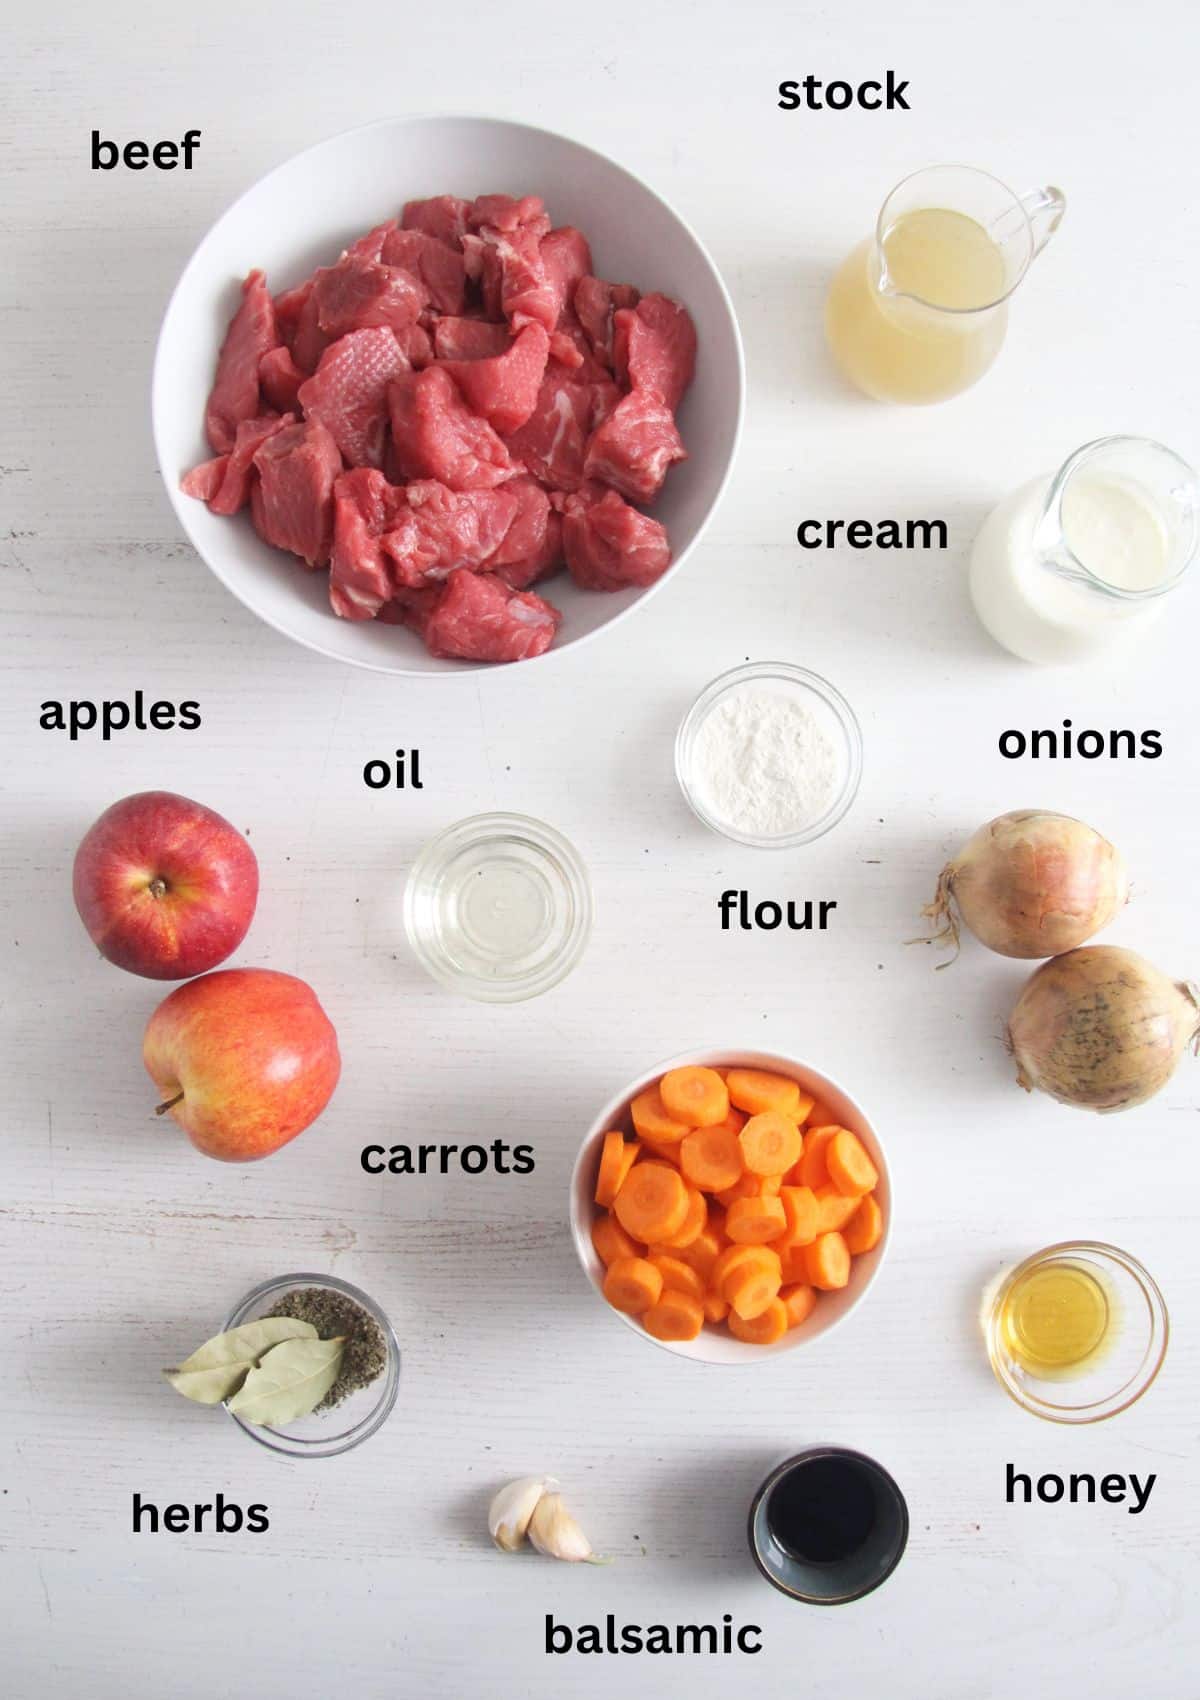 listed ingredients for making stew with beef, apples, and carrots.